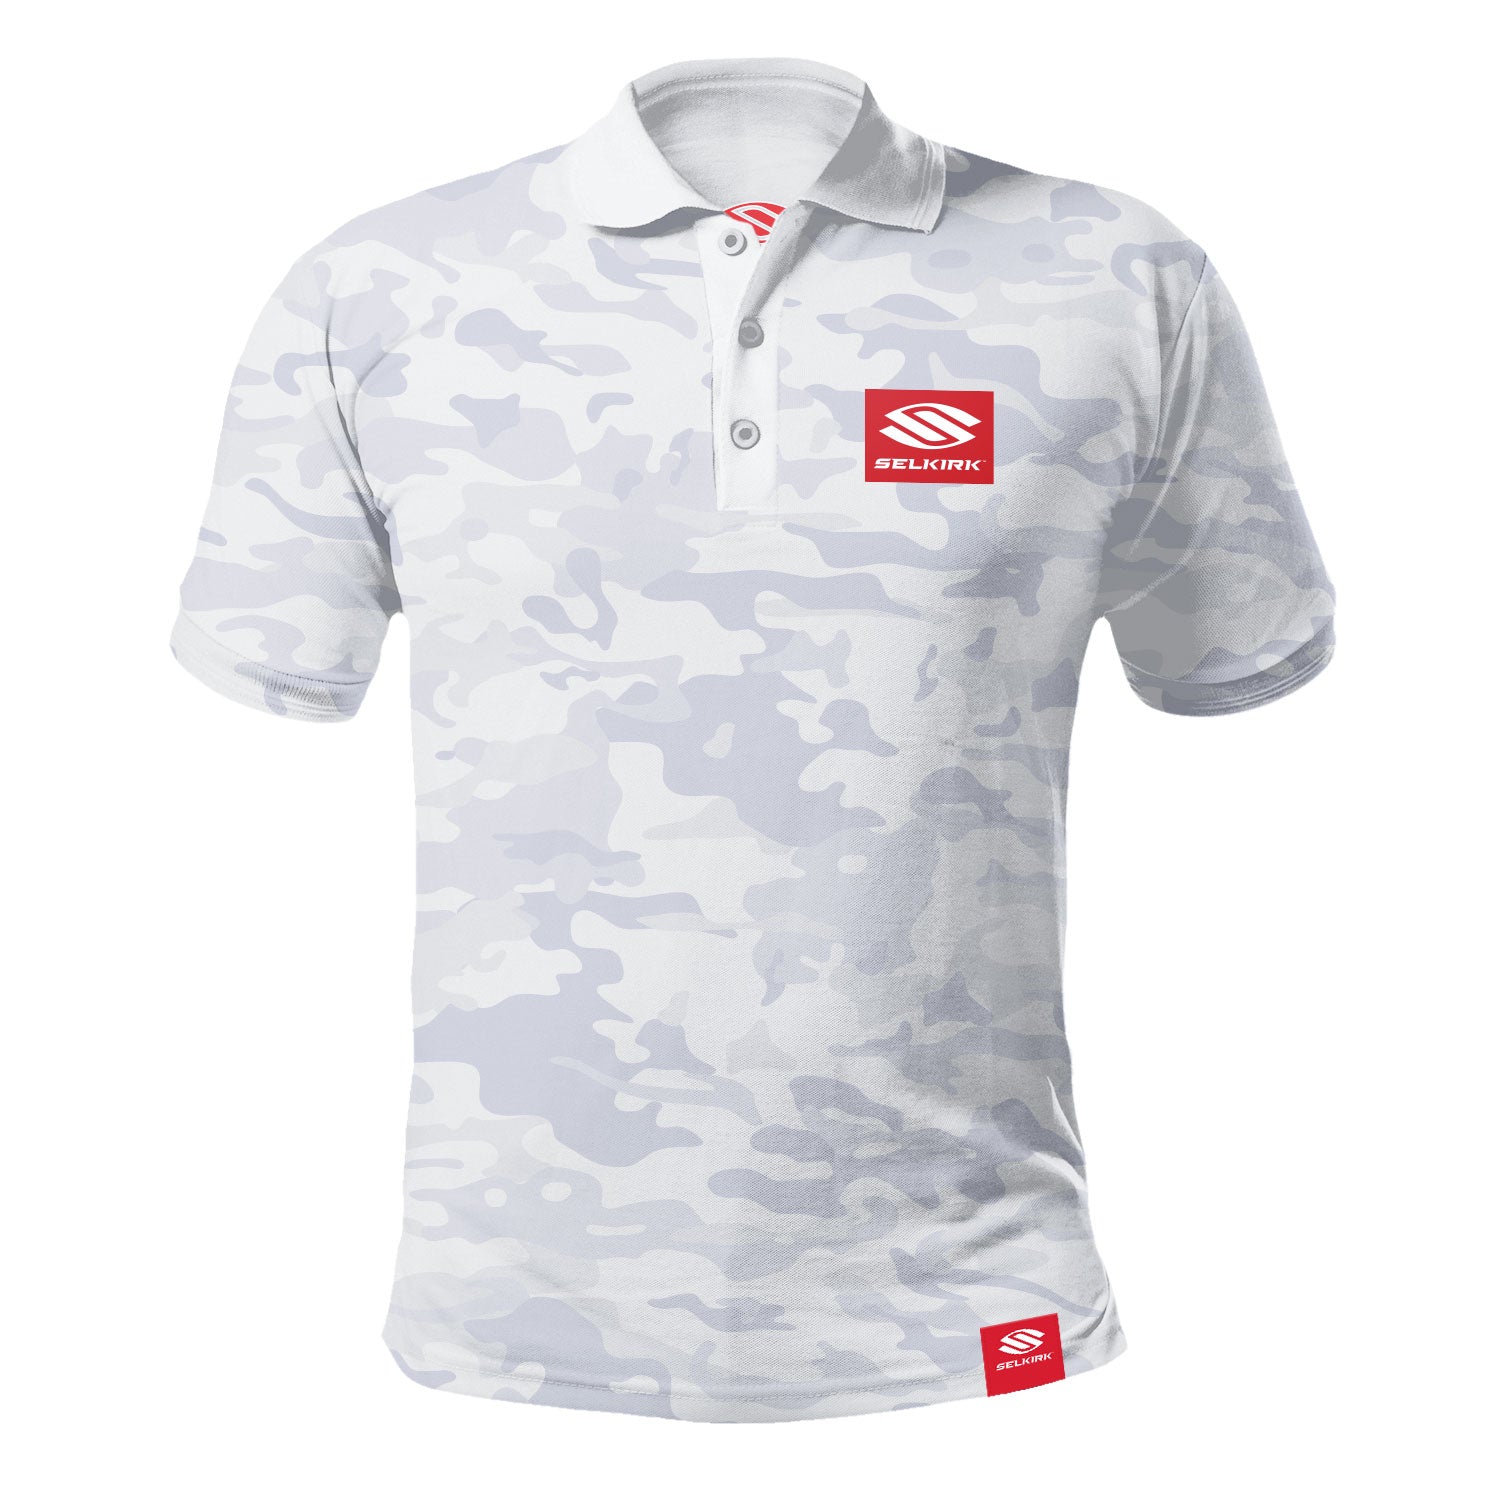 We Stretch-Wik Technology Selkirk - Selkirk Camo Label Red Sport | Men\'s Pickleball Are Polo